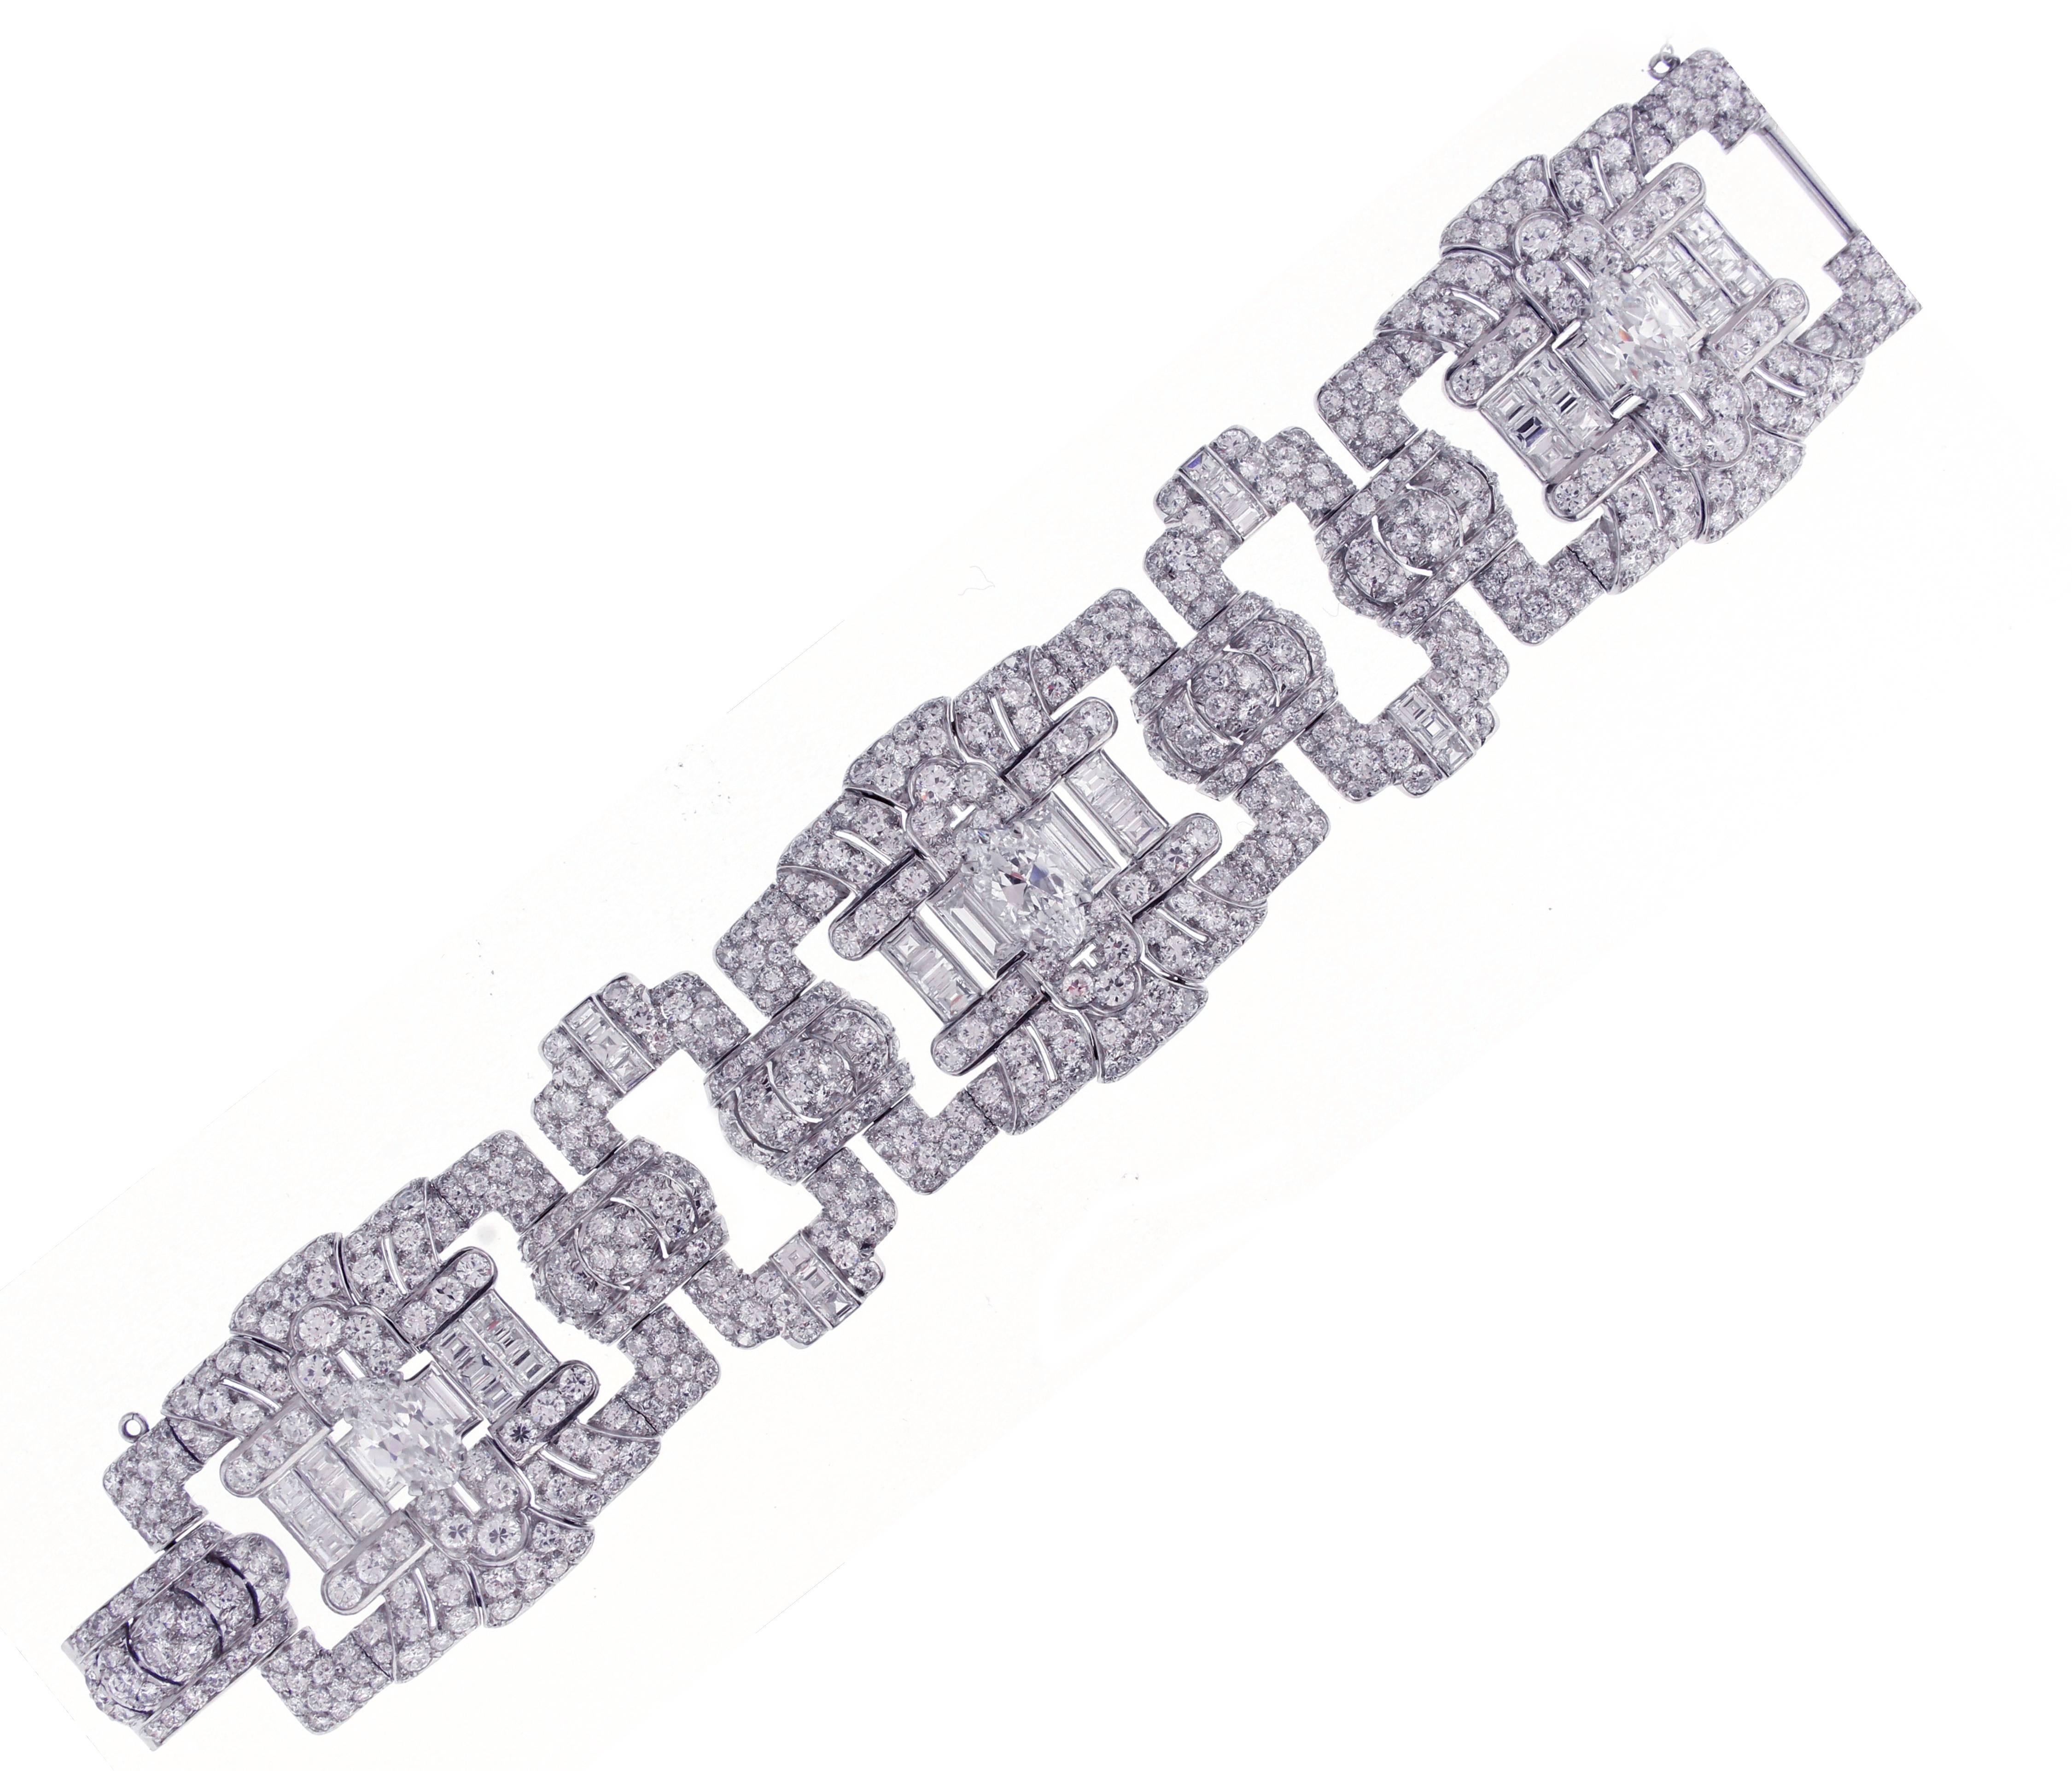 Spectacular wide Art Deco bracelet signed Cartier. The bracelet is comprised of 3 marquise cut diamonds weighing 5.23 carats with an additional 643 diamonds weighing approximately 44.70 carats. The bracelet is signed Cartier on the back of the clasp